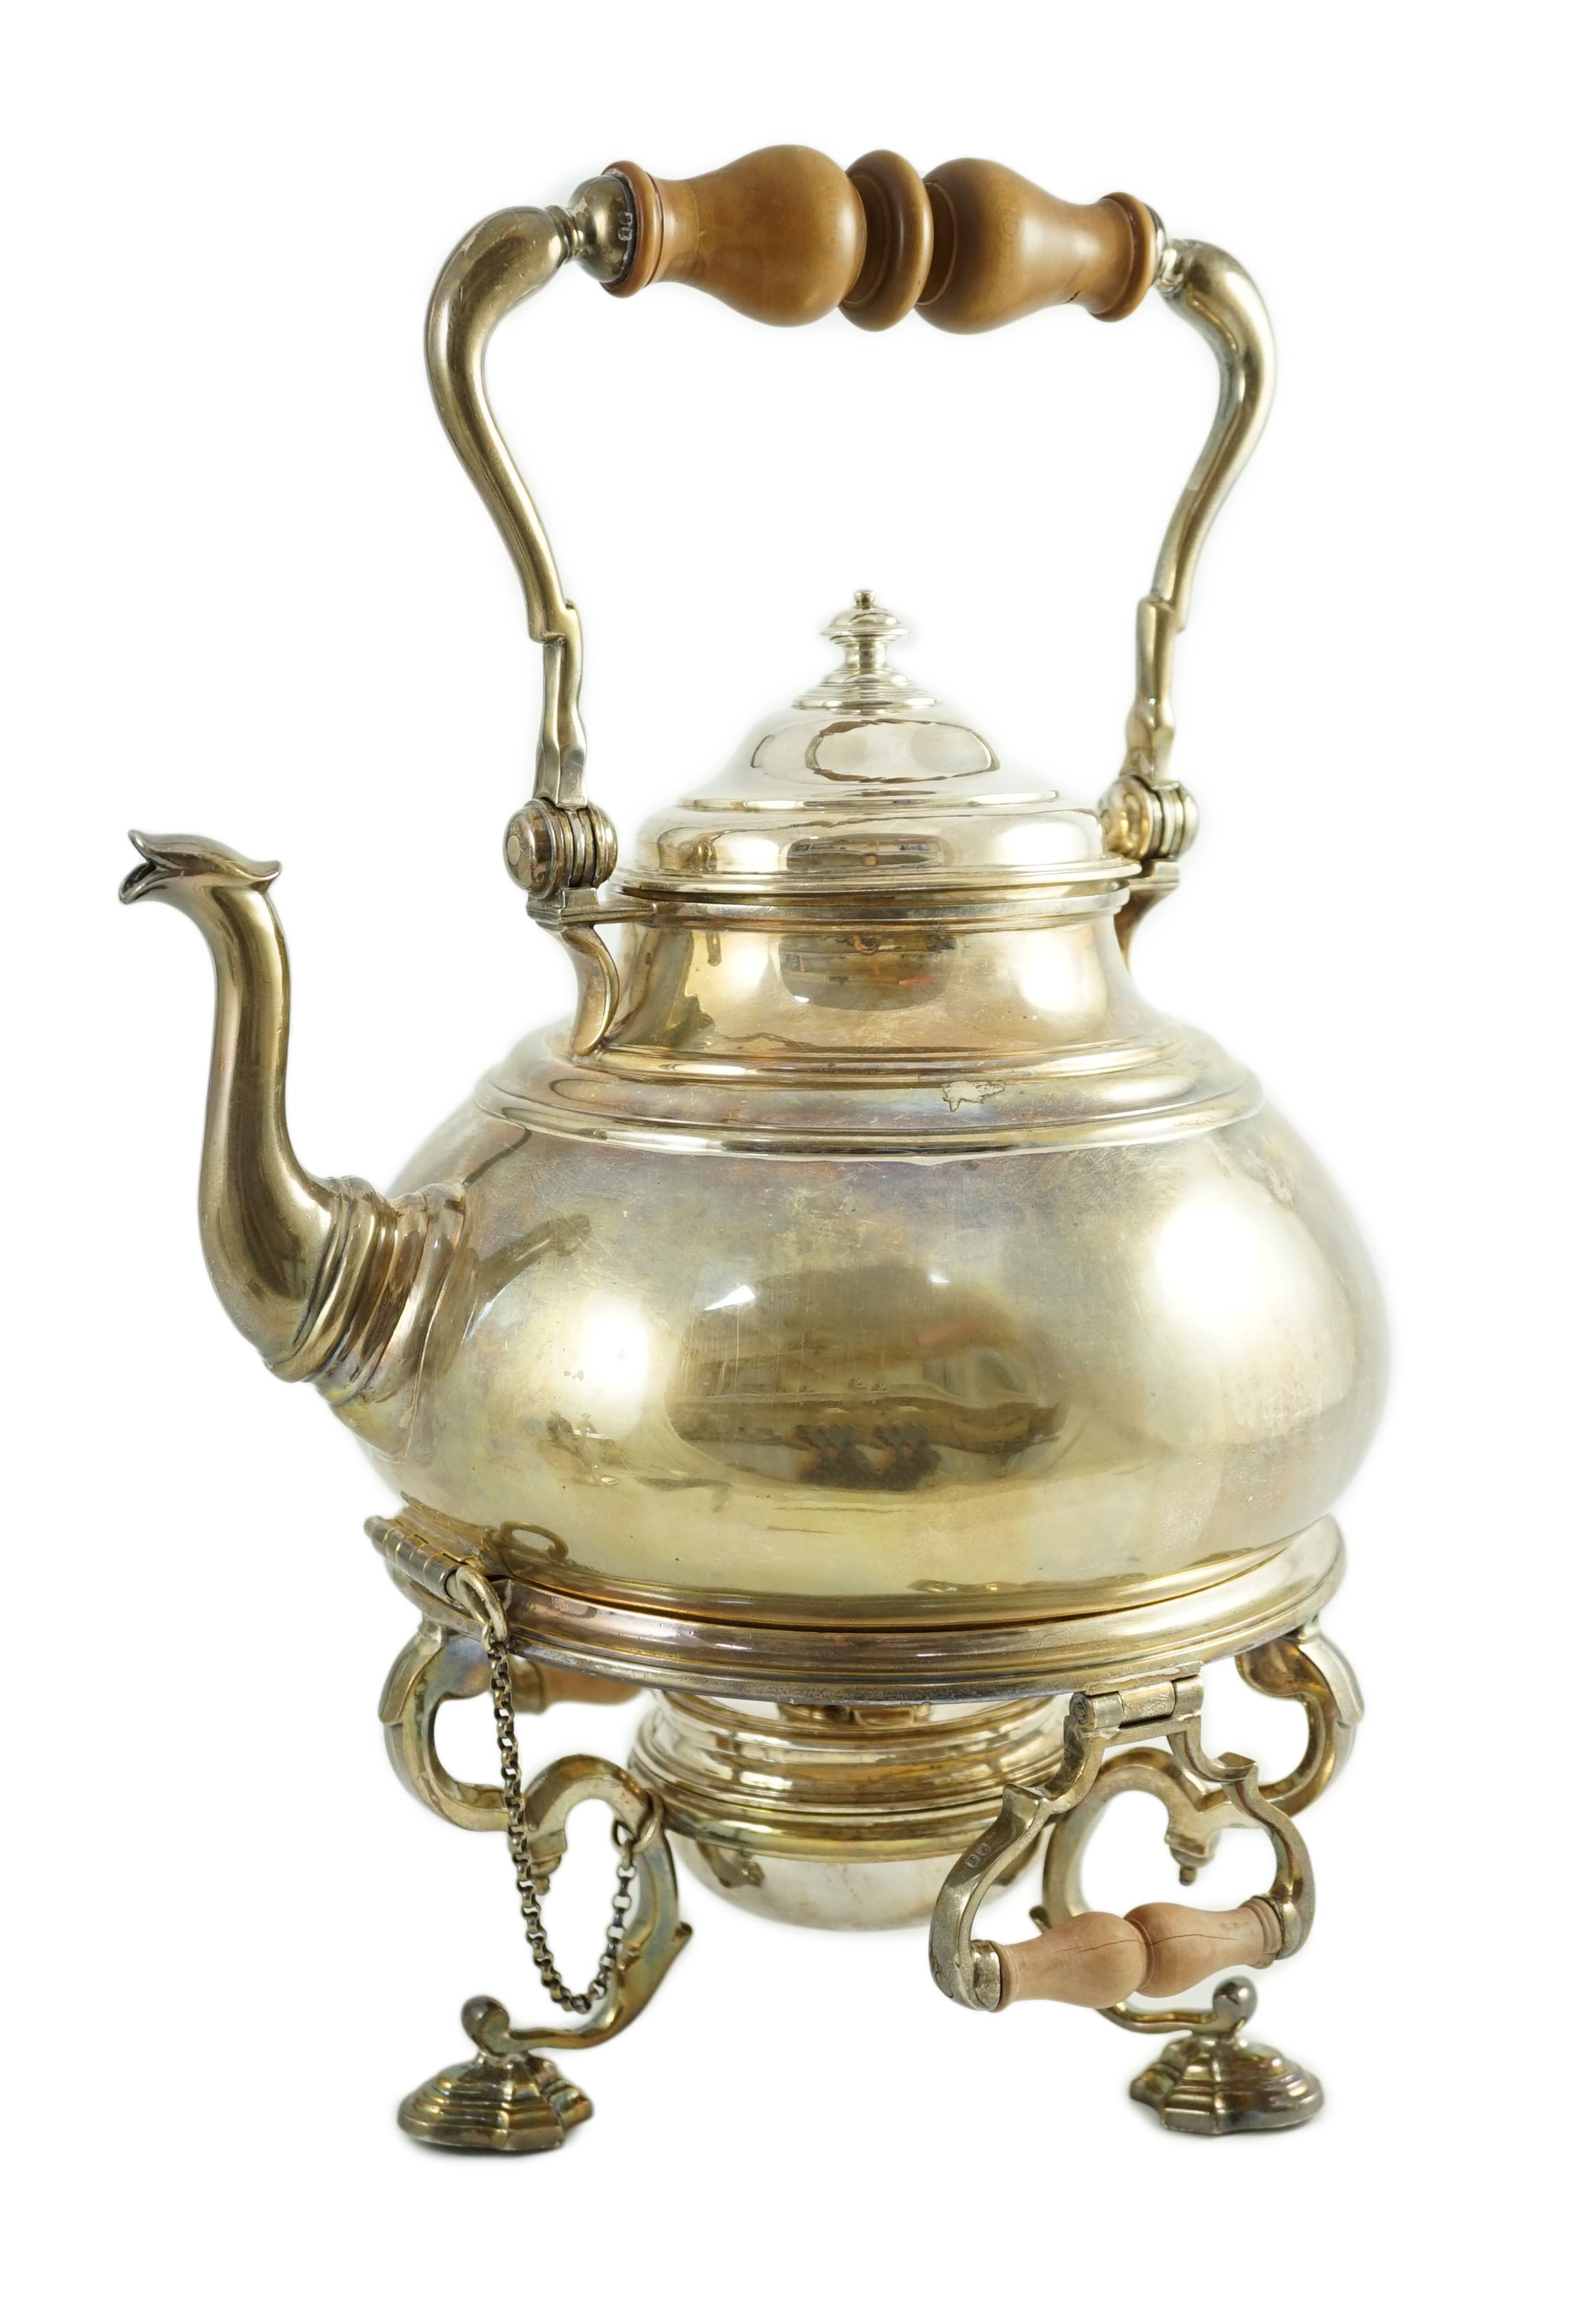 A large George V Britannia standard silver tea kettle on two handled stand, with burner, by